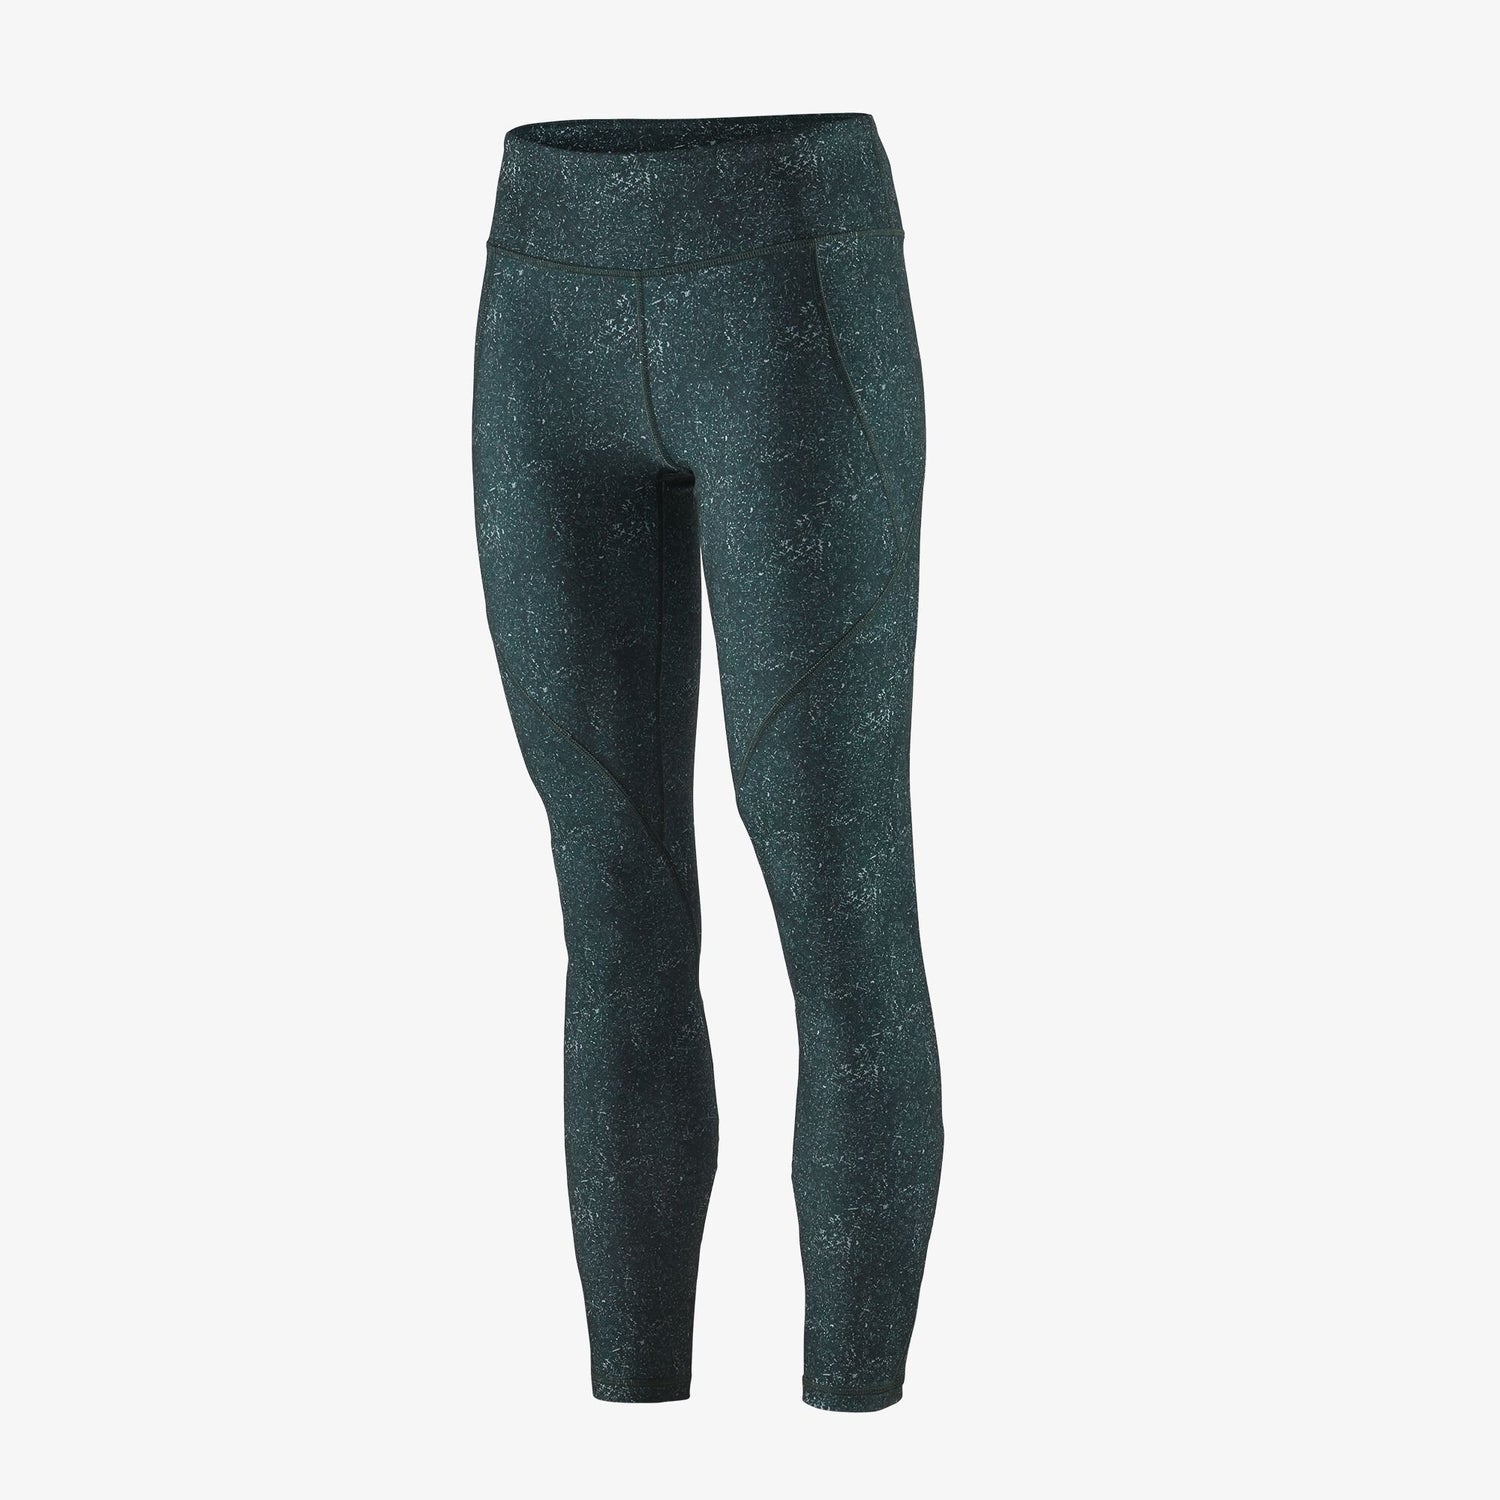 Centered Tights - Cosmic Carving: Northern Green